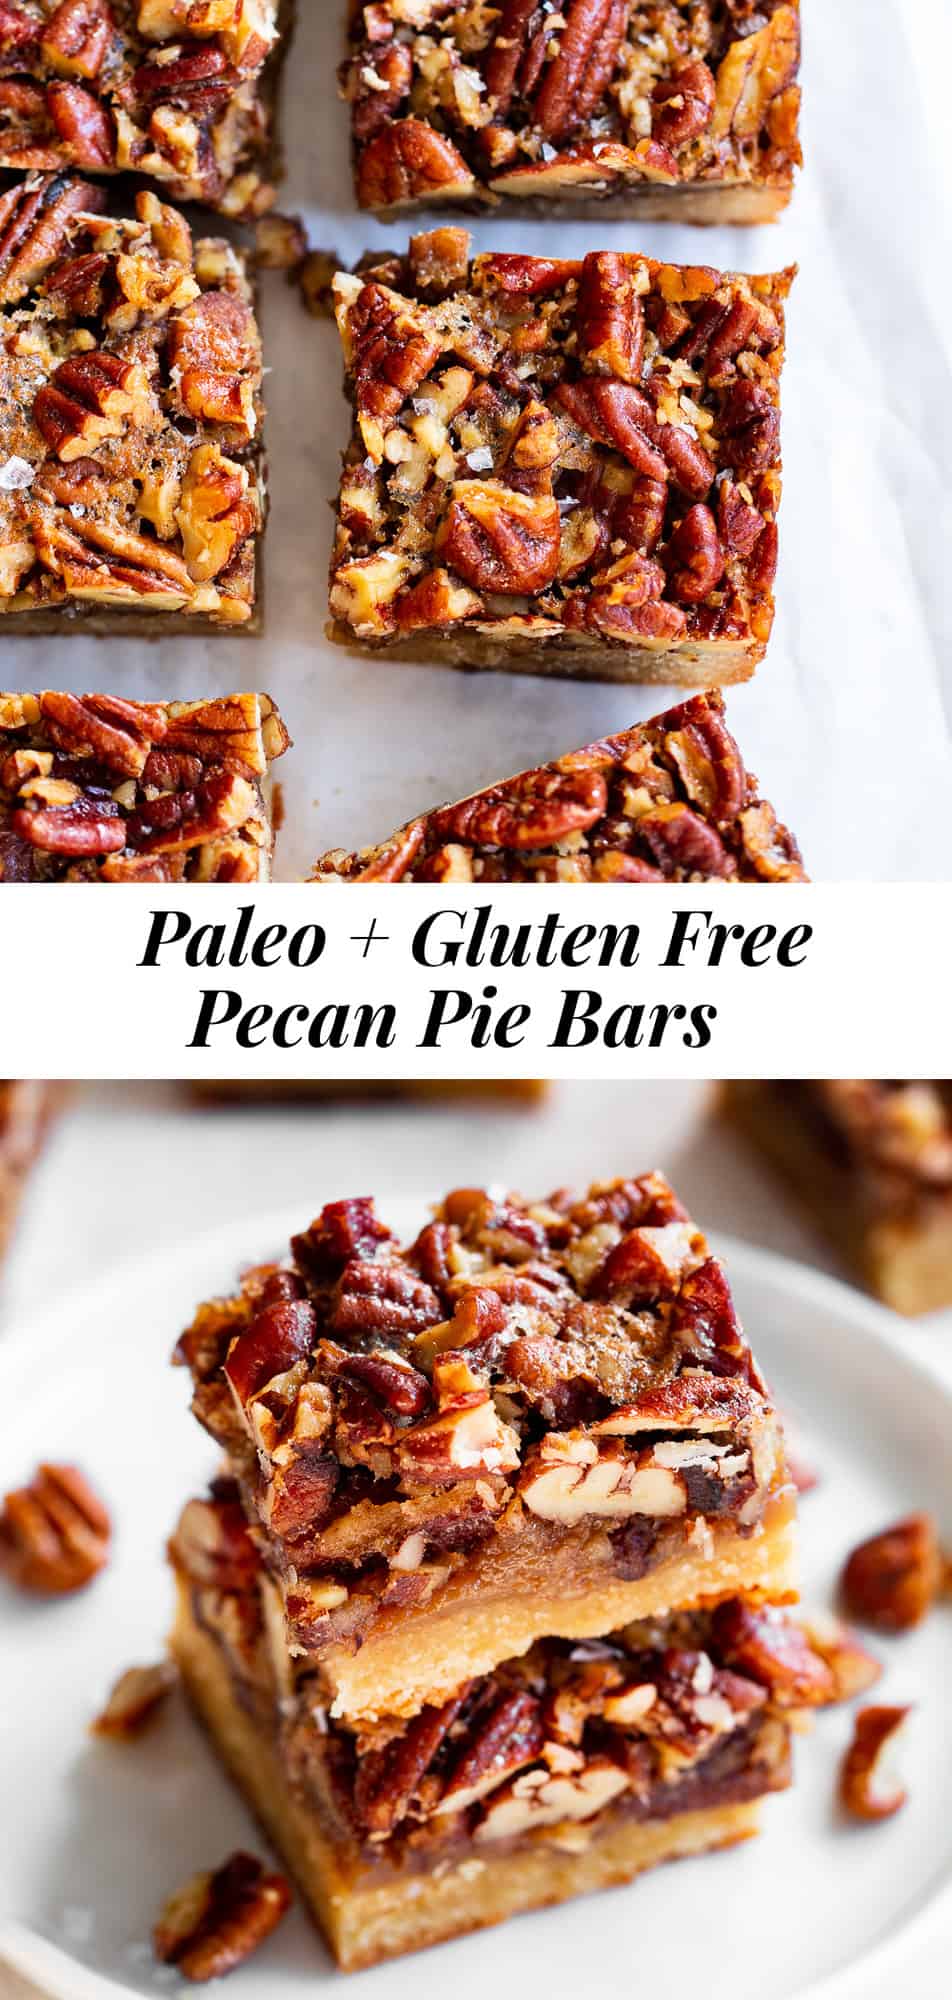 These pecan pie bars start with a sugar cookie crust, topped with a sweet, gooey caramelized pecan layer. No refined sugar, gluten free, grain free, and dairy free options. Great for holiday desserts or an anytime special treat! #paleo #glutenfree #pecanpie #paleobaking #thanksgiving #christmas